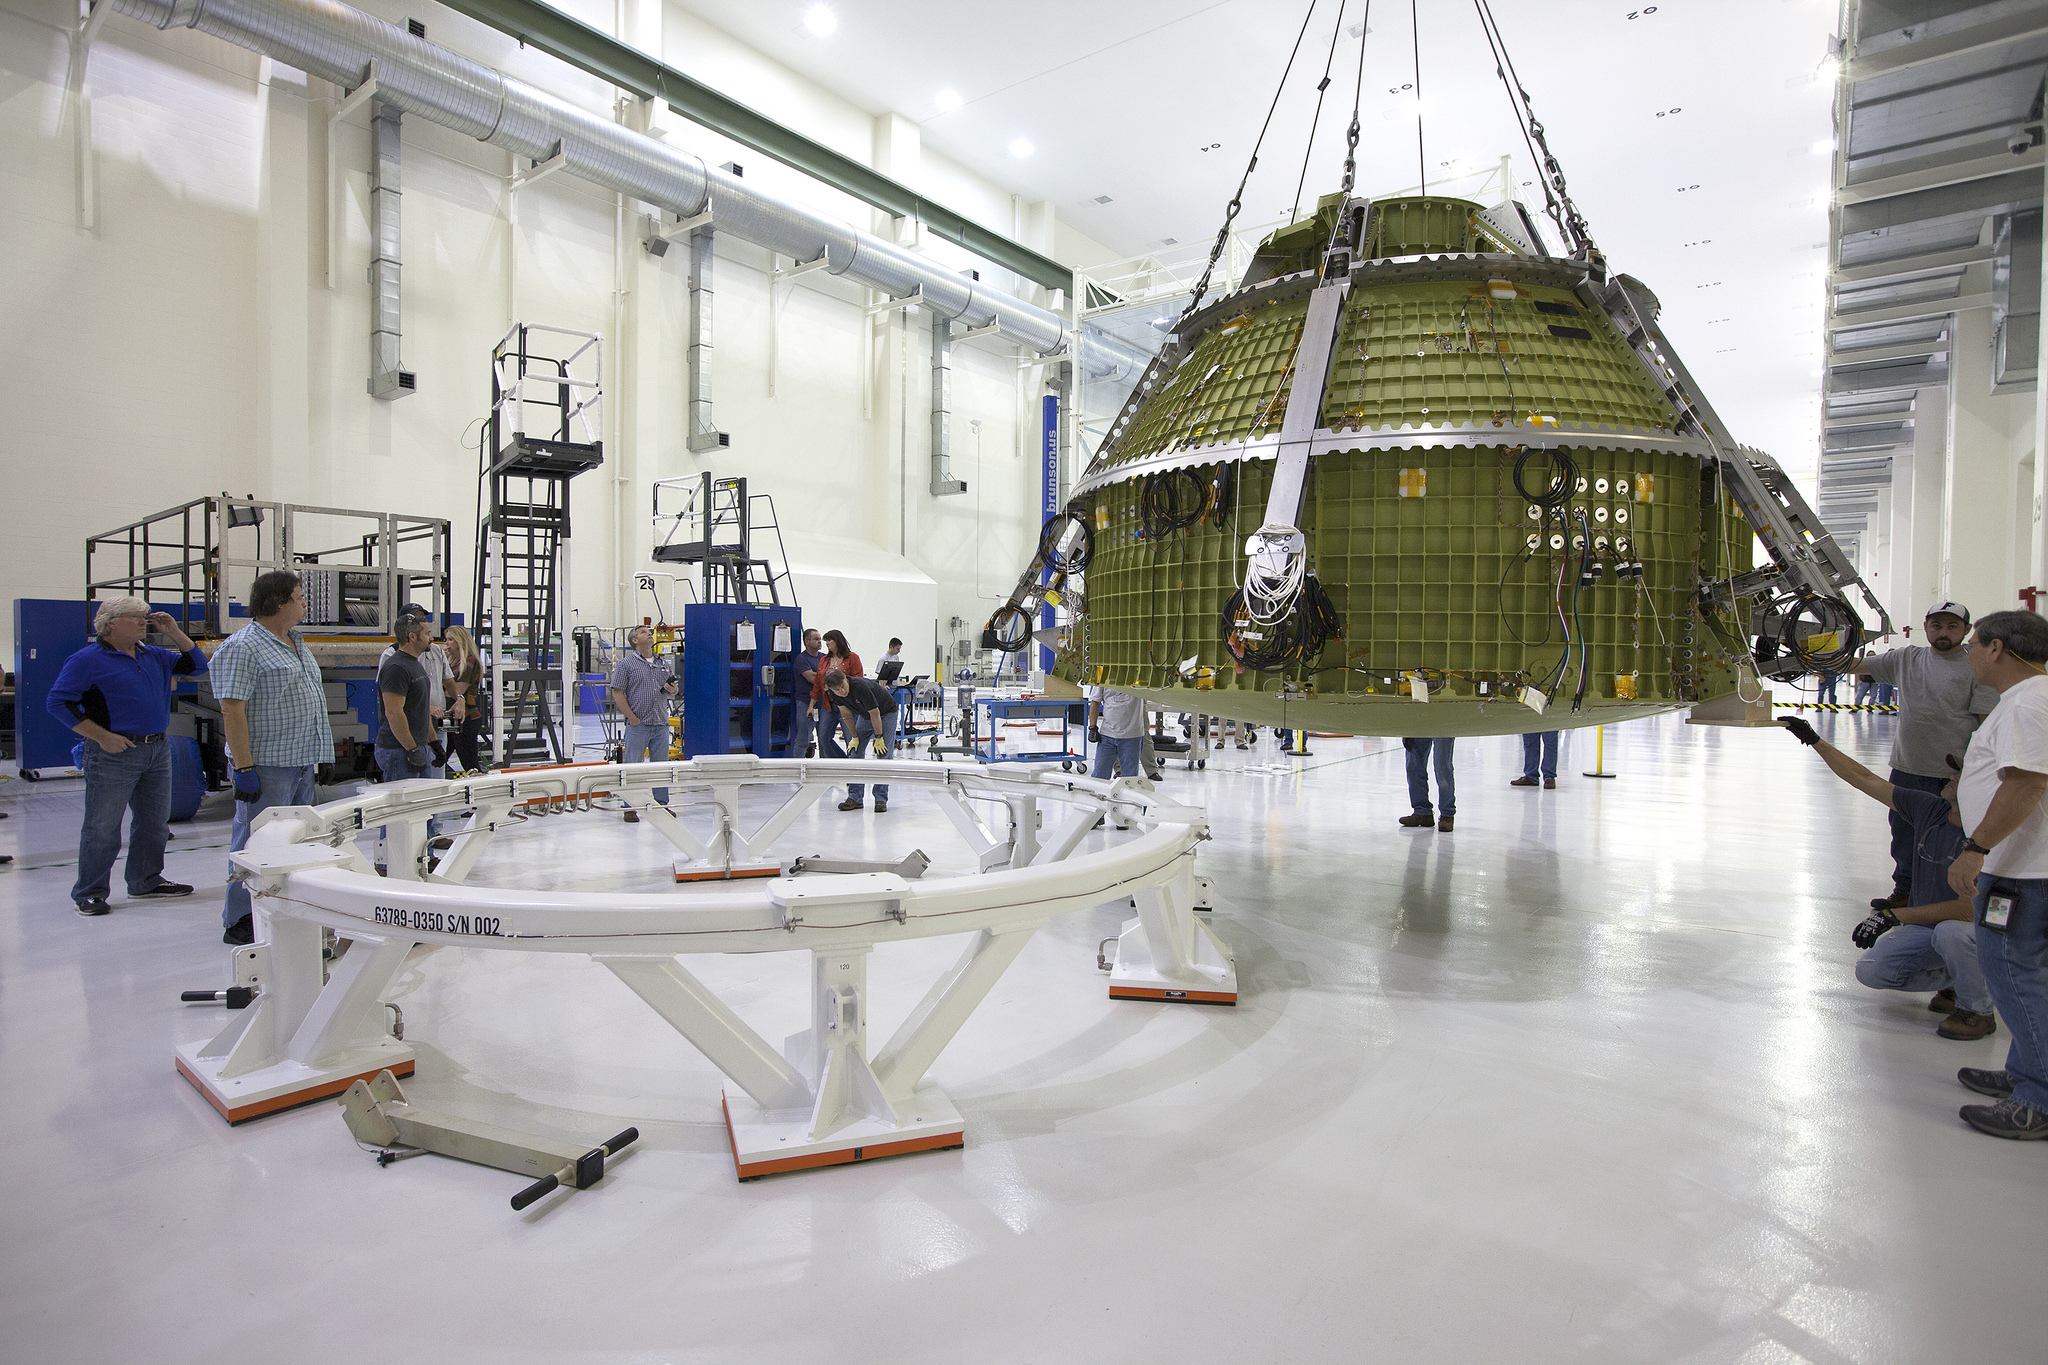 The Orion crew module pressure vessel for NASA’s Exploration Mission 1 (EM-1) is moved by crane along the high bay inside the Neil Armstrong Operations and Checkout Building at NASA’s Kennedy Space Center in Florida. The crew module was transferred to a proof pressure cell in the high bay for pressure checks. Photo Credit: NASA/Kim Shiflett